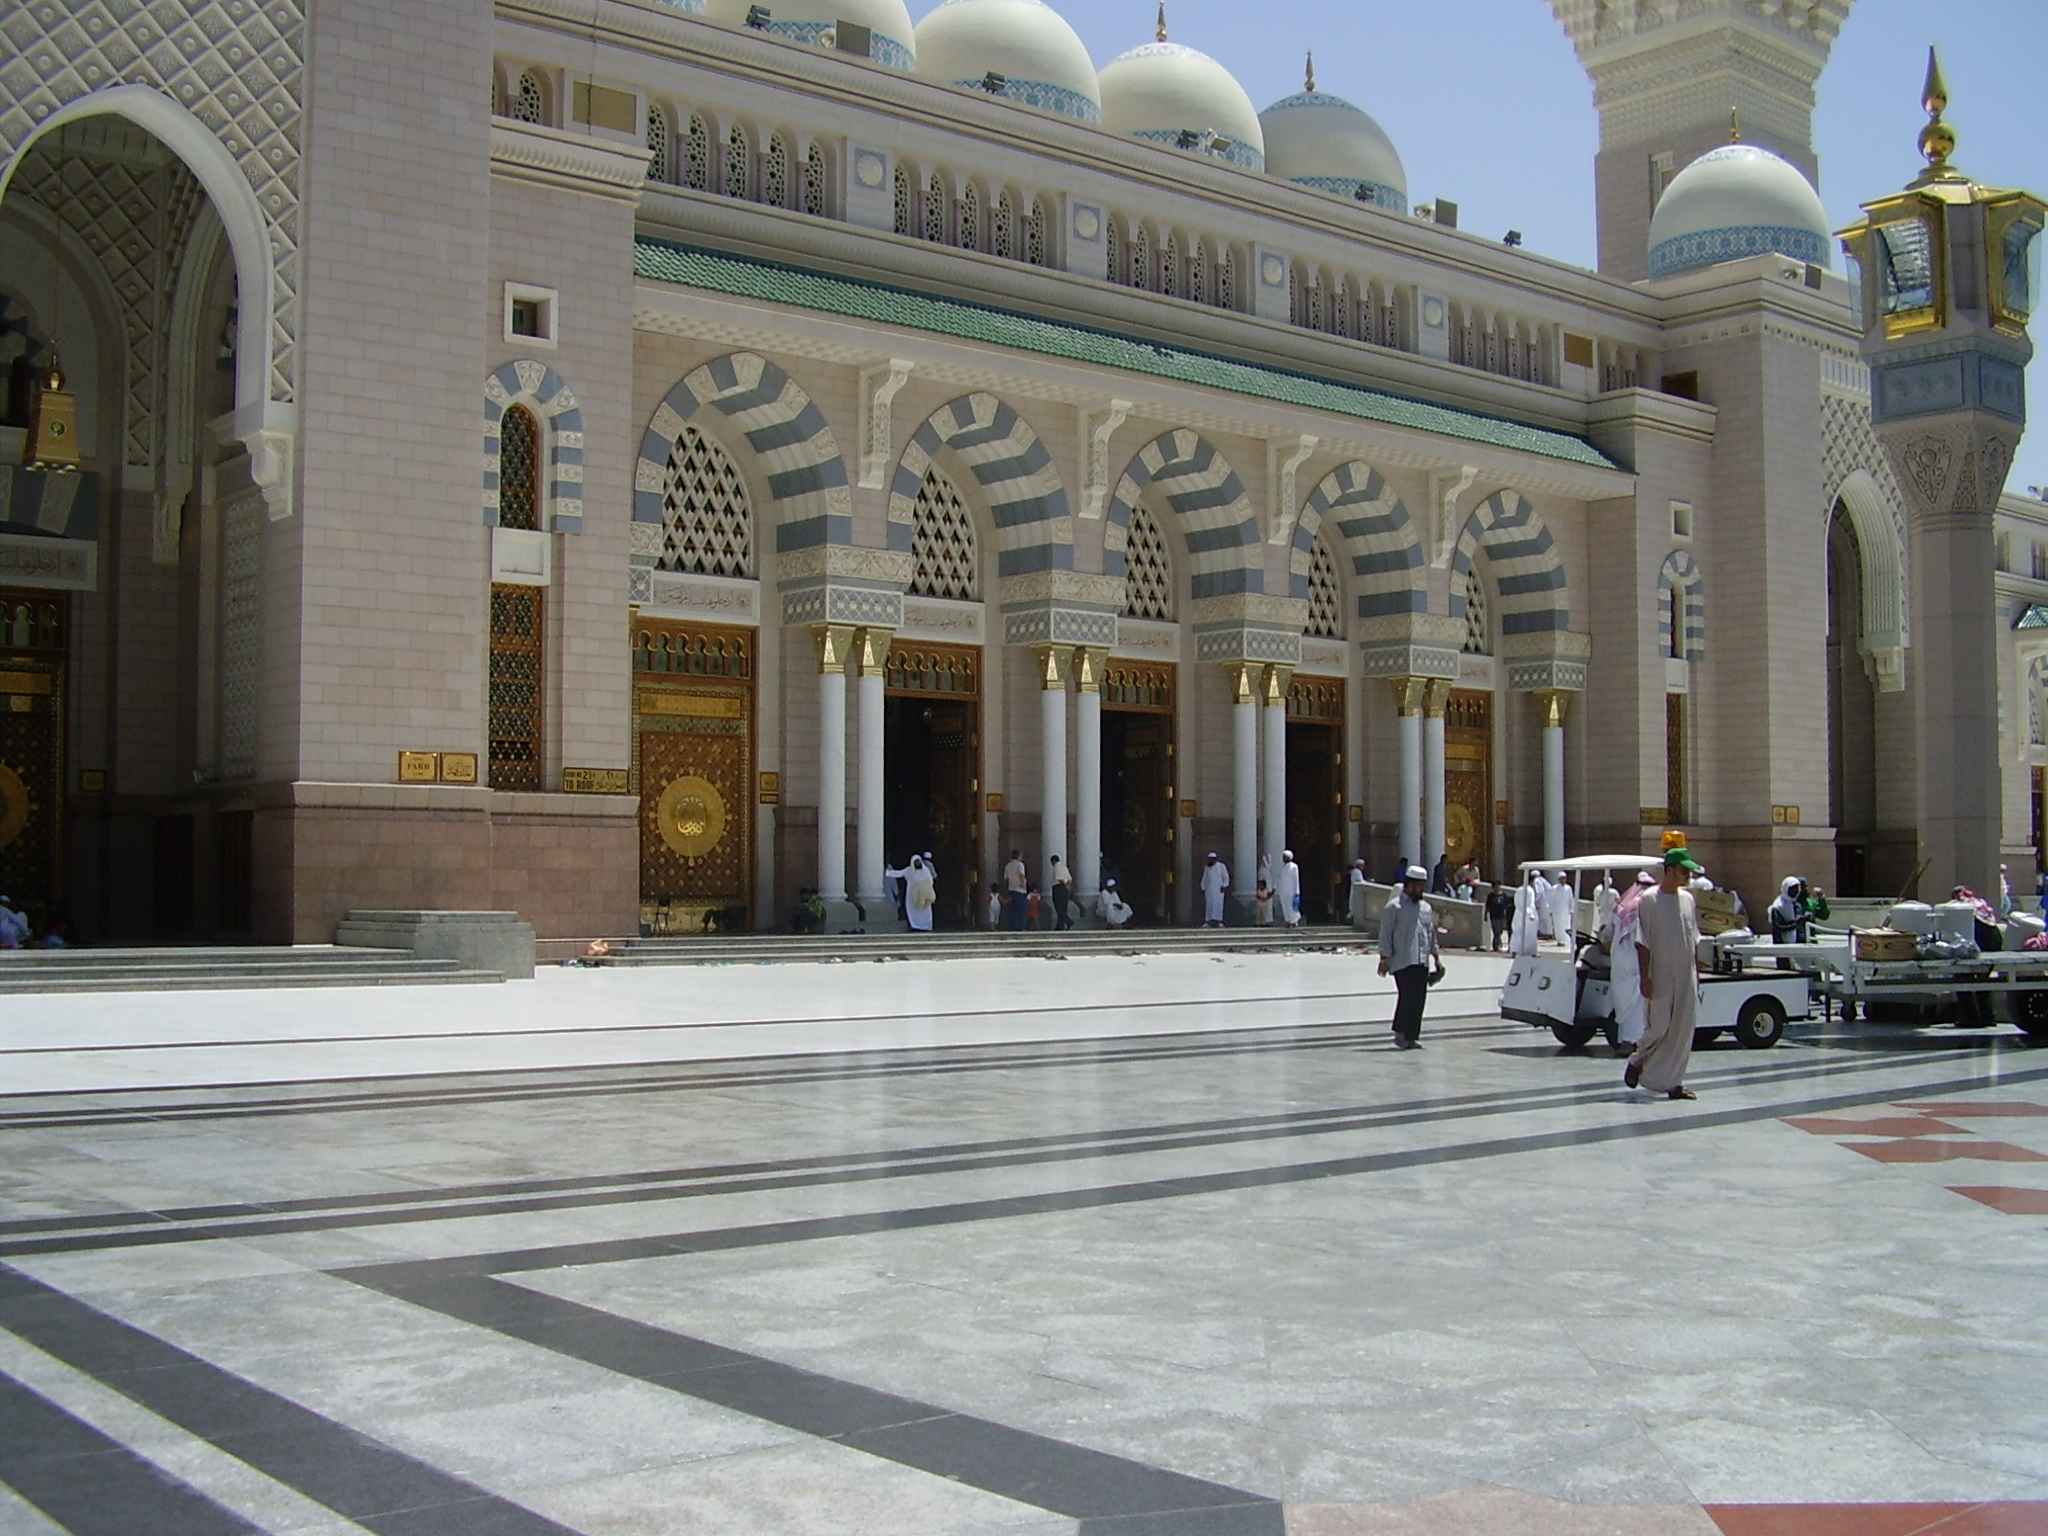 Masjid An-Nabawi in